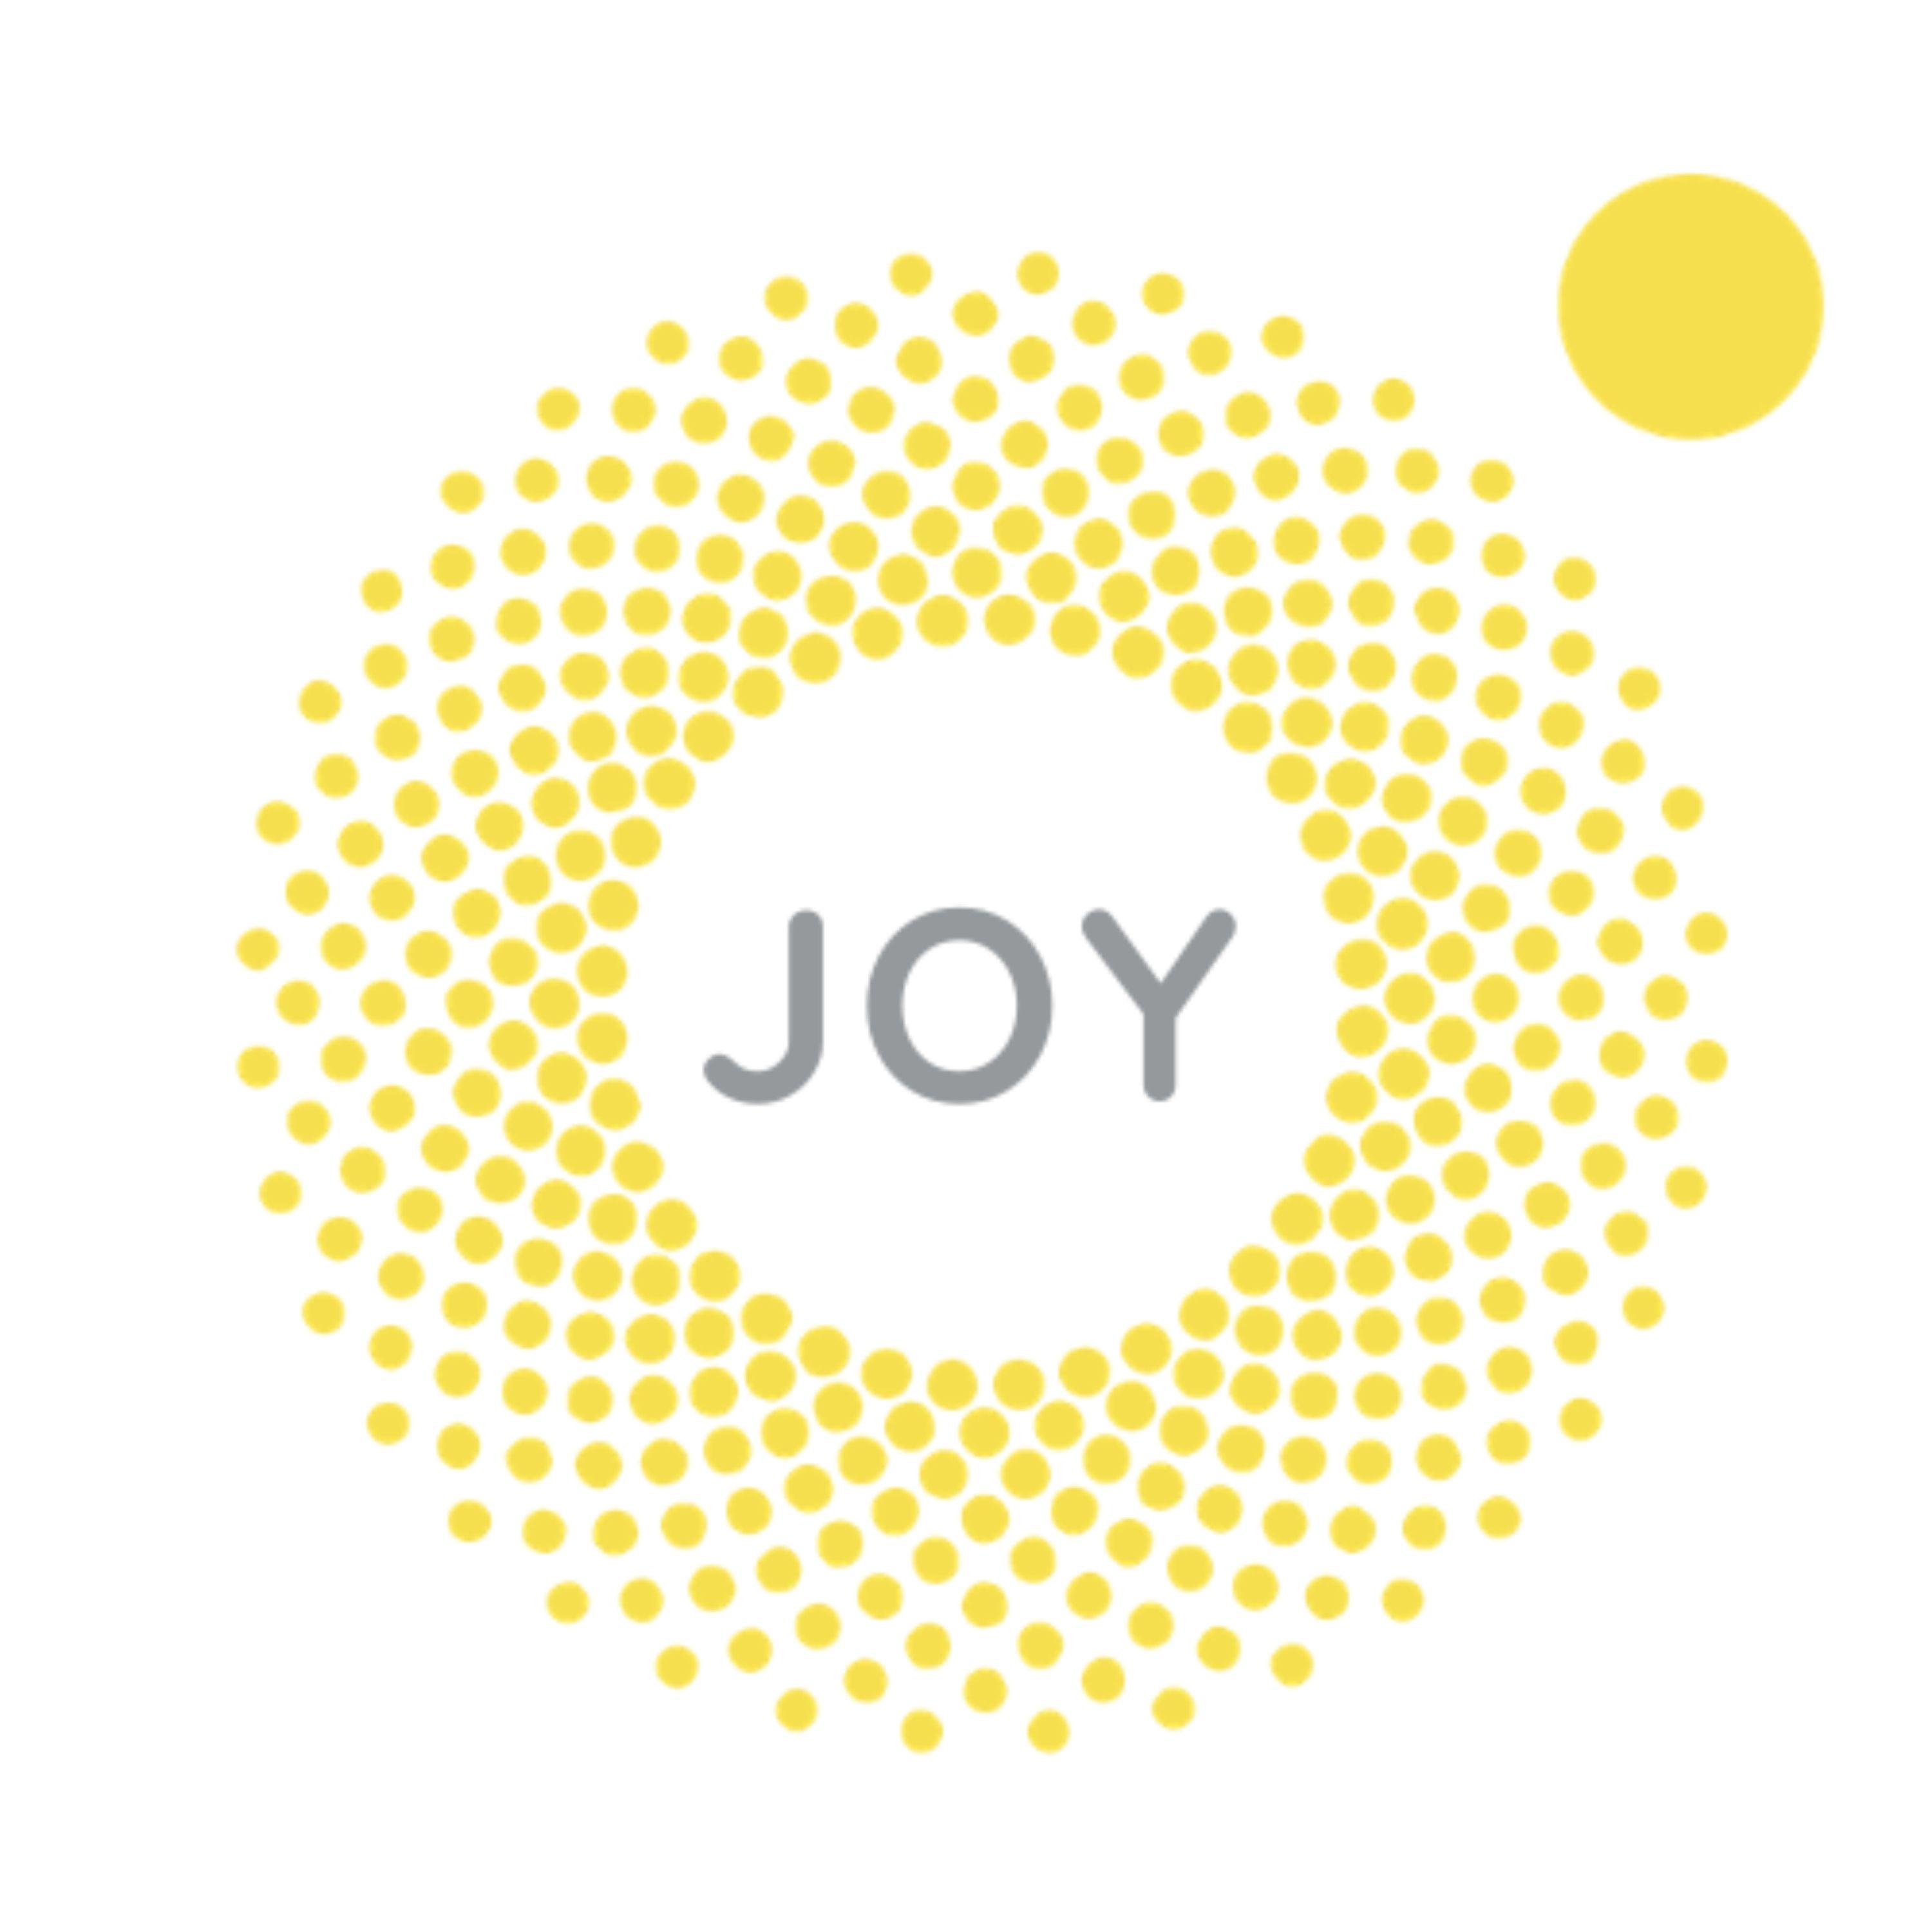 Artwork for podcast The Art and Science of Joy